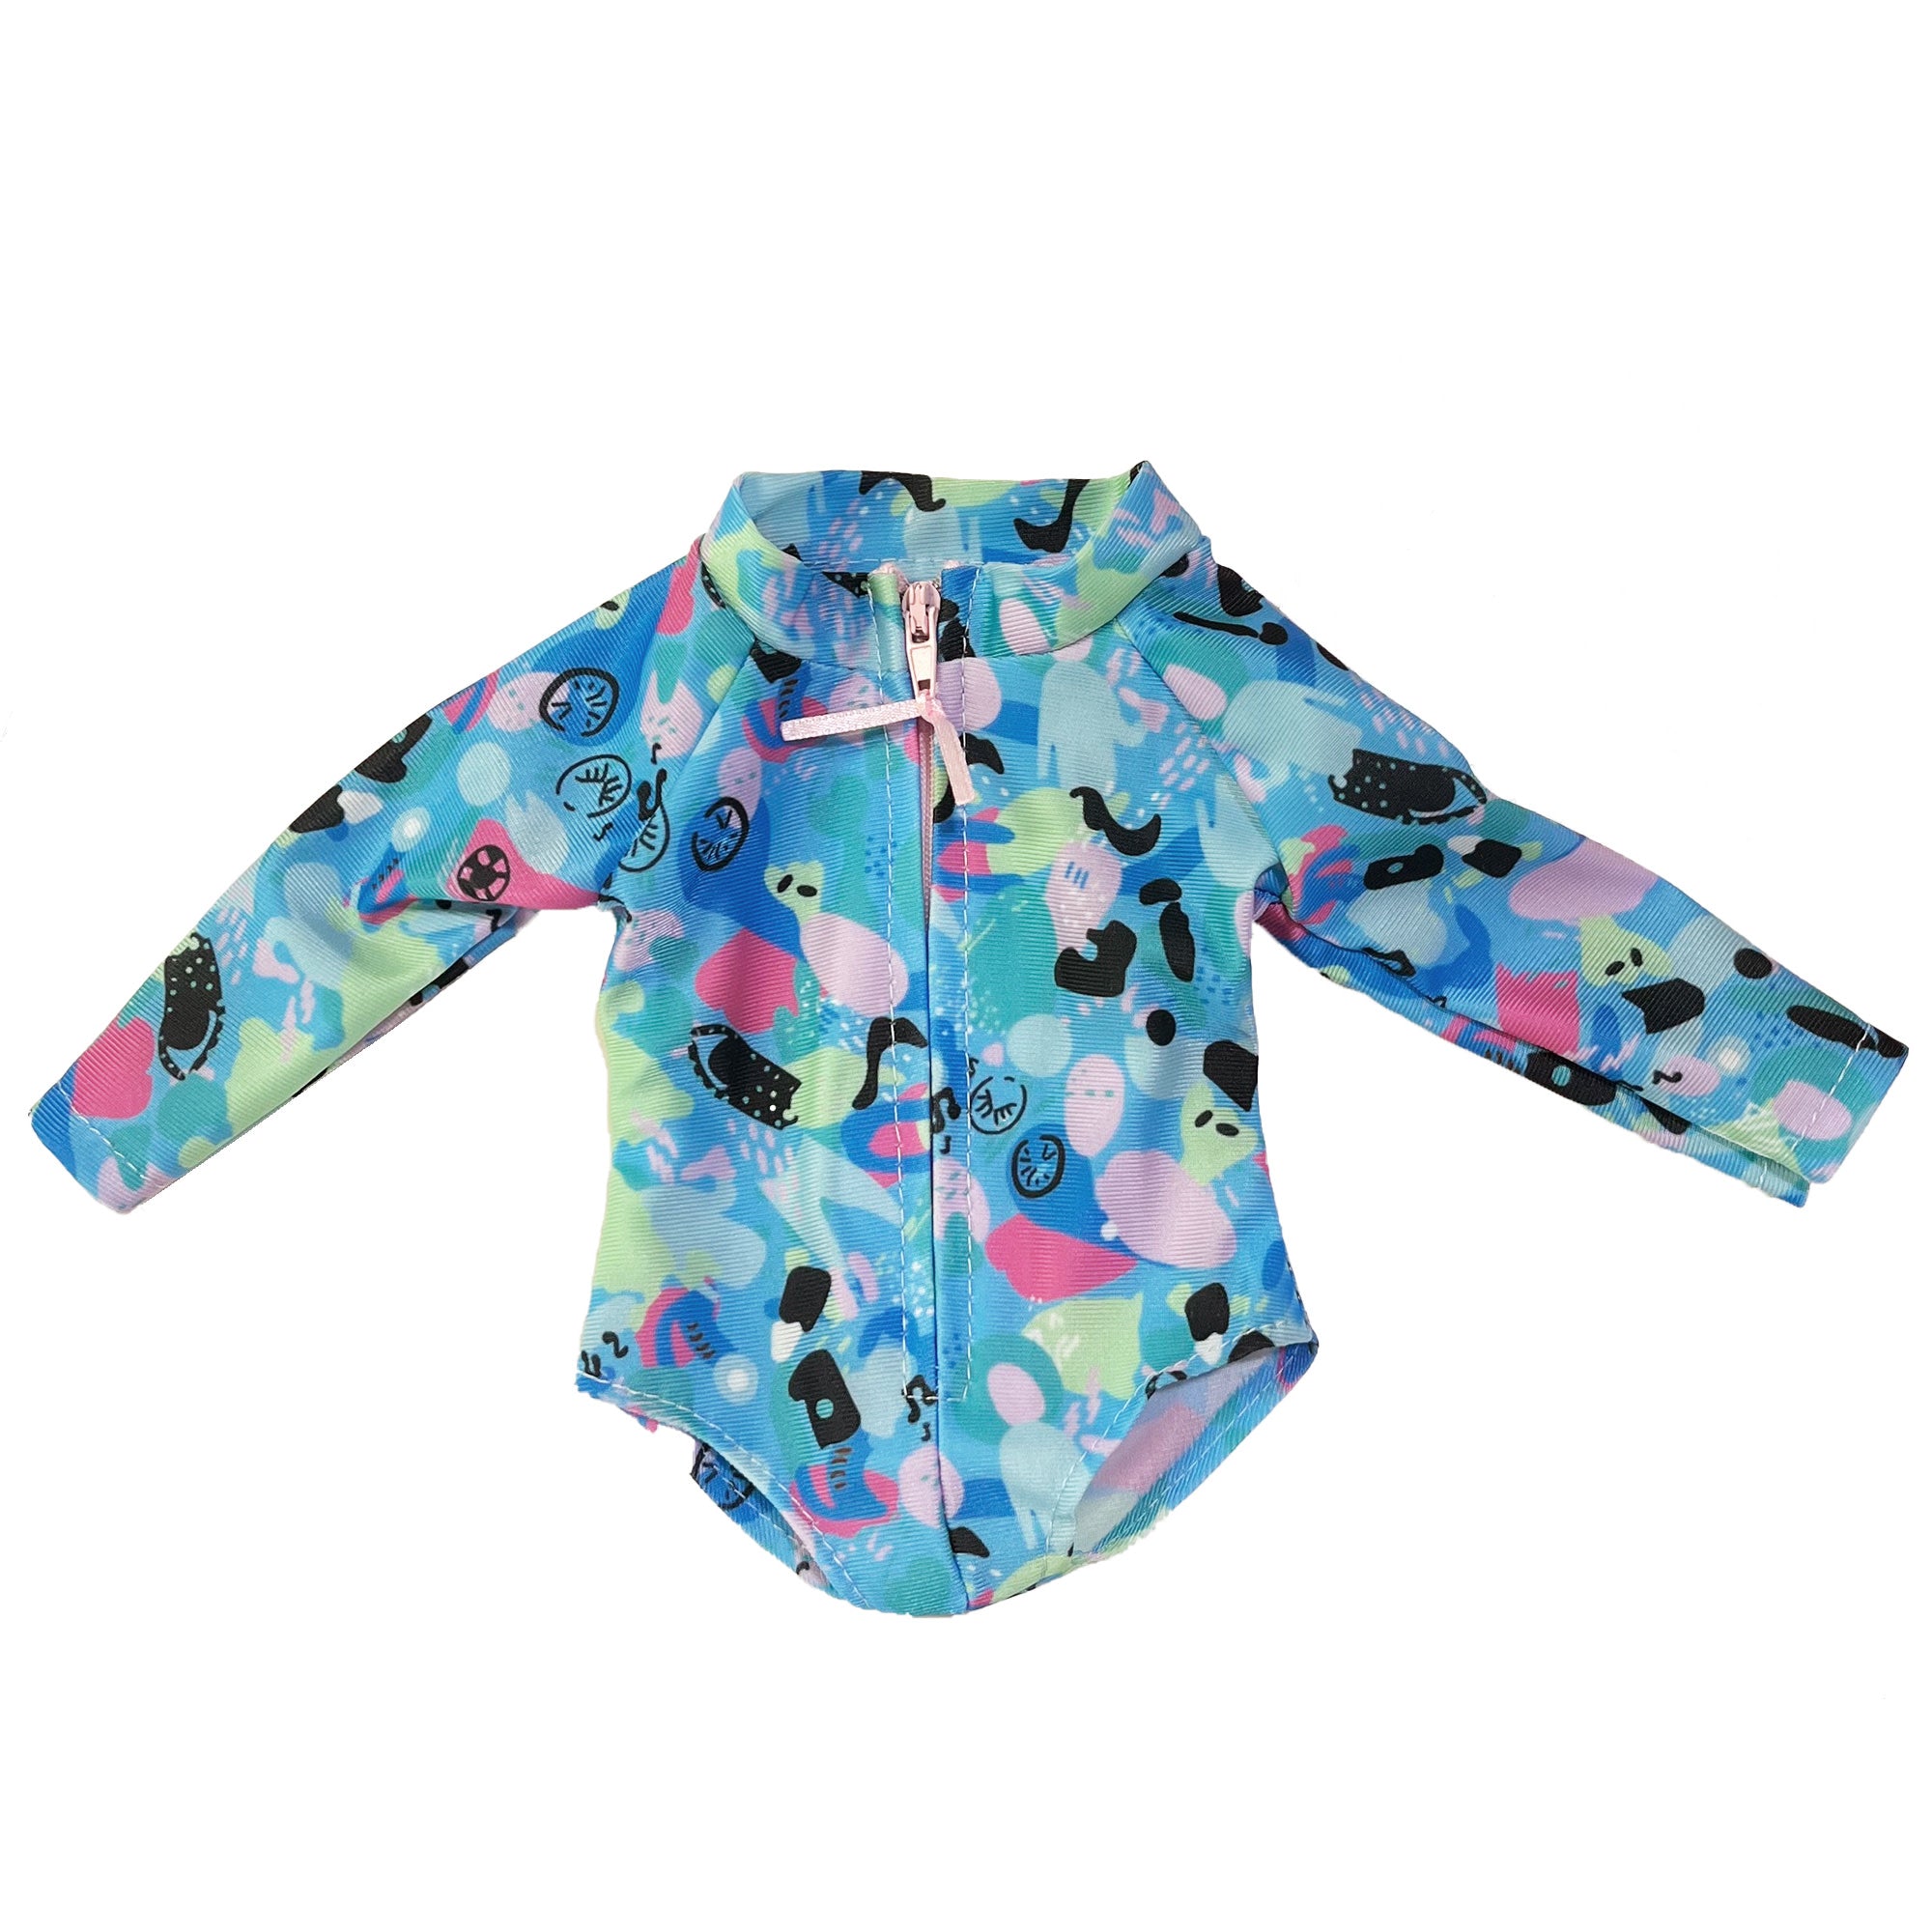 Sophia's Colorful Collage Print Long Sleeve Rash Guard Swimsuit for 18" Dolls, Blue